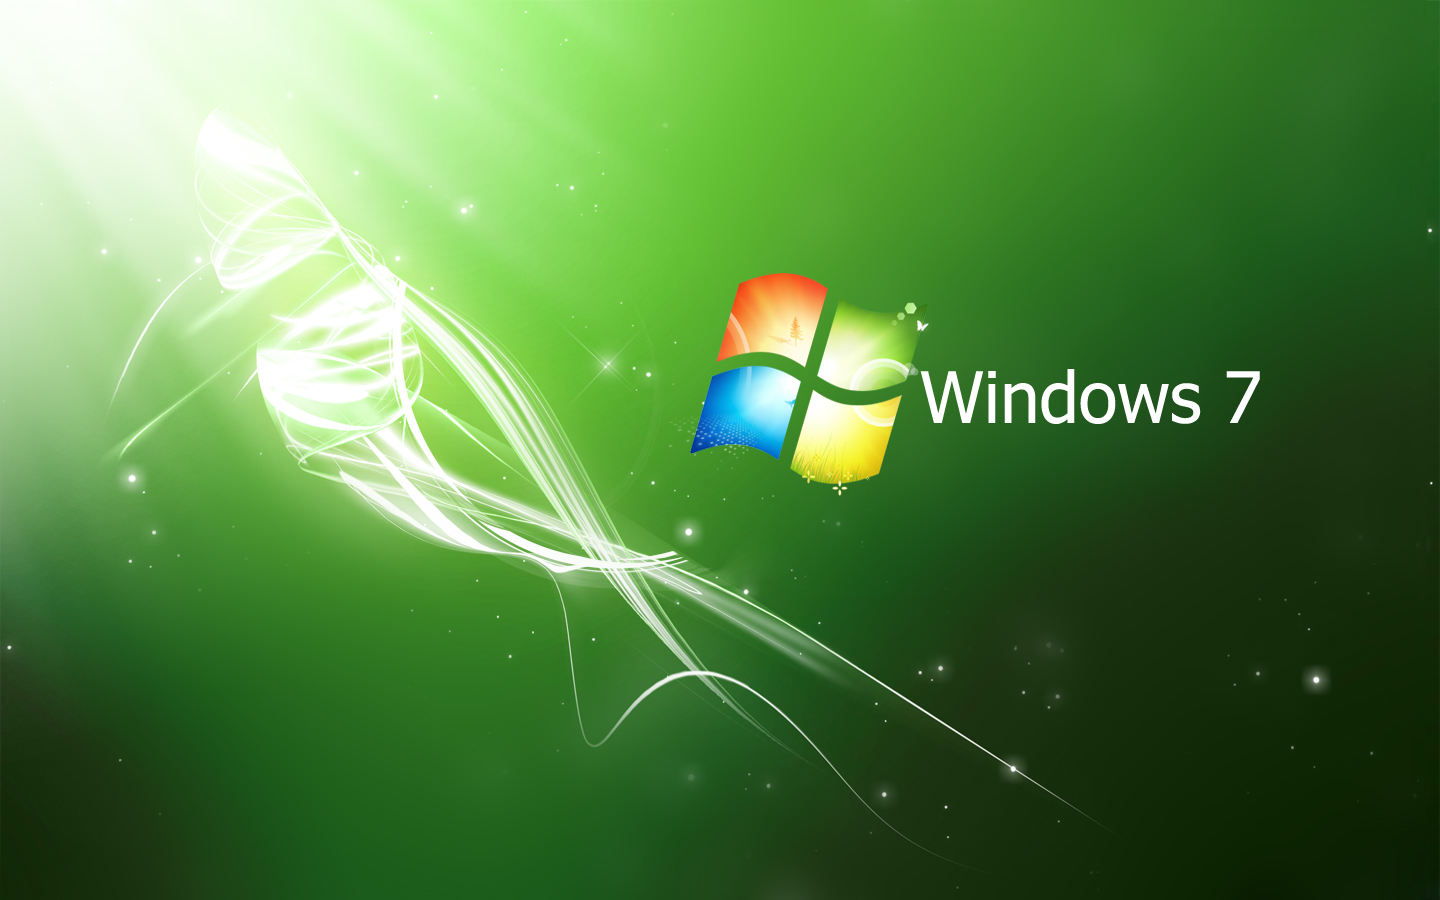 HD Wallpaper For Windows Cool Background